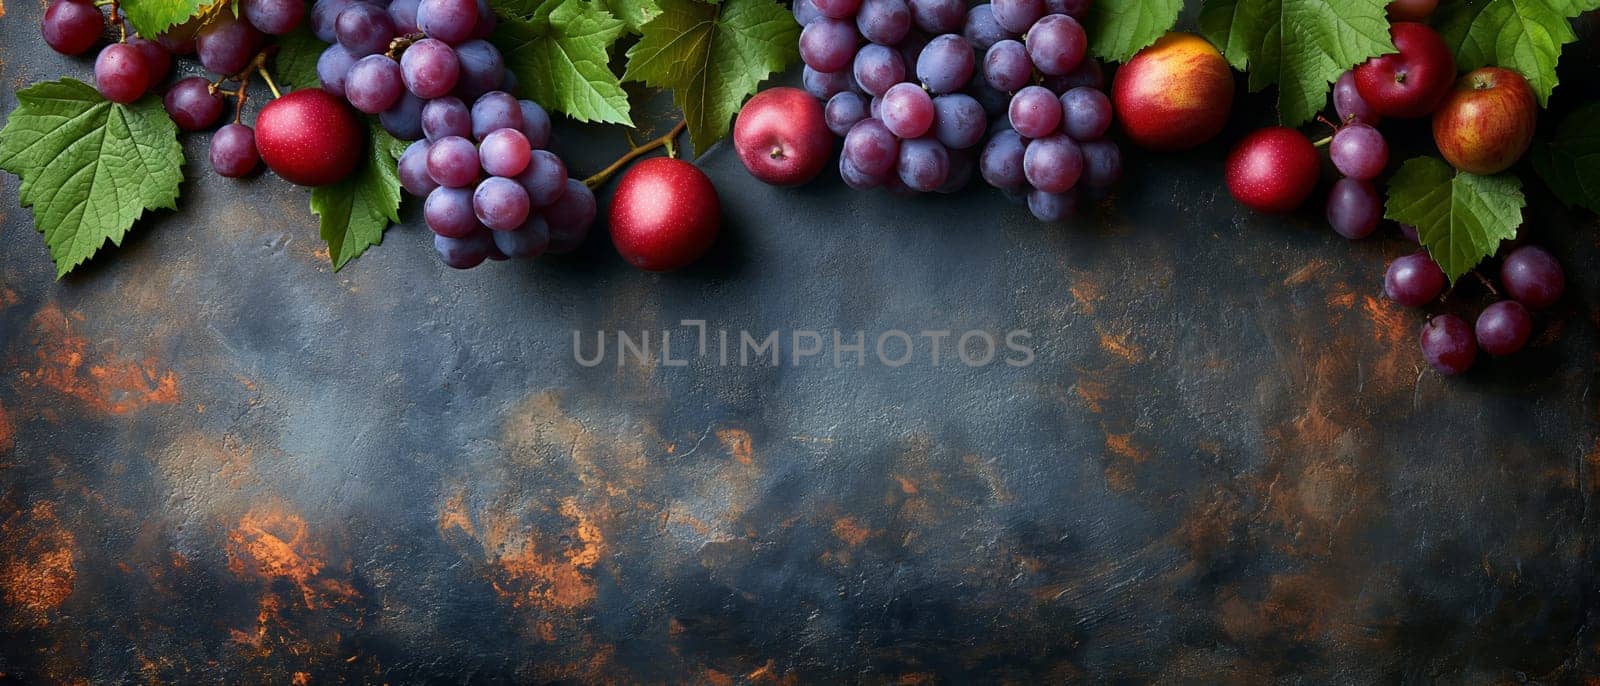 Painting depicting grapes and leaves on a dark background.